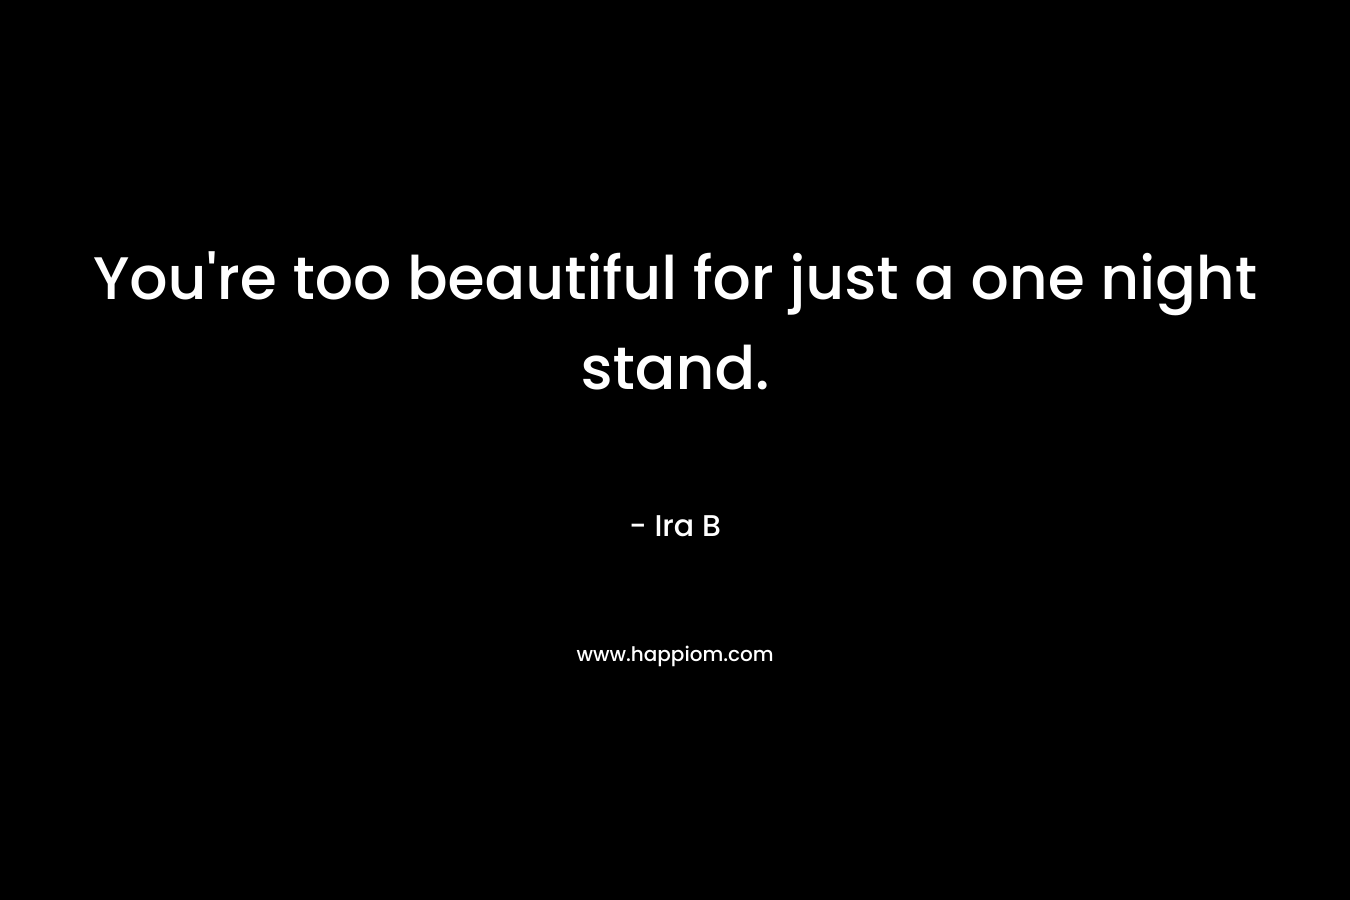 You're too beautiful for just a one night stand.